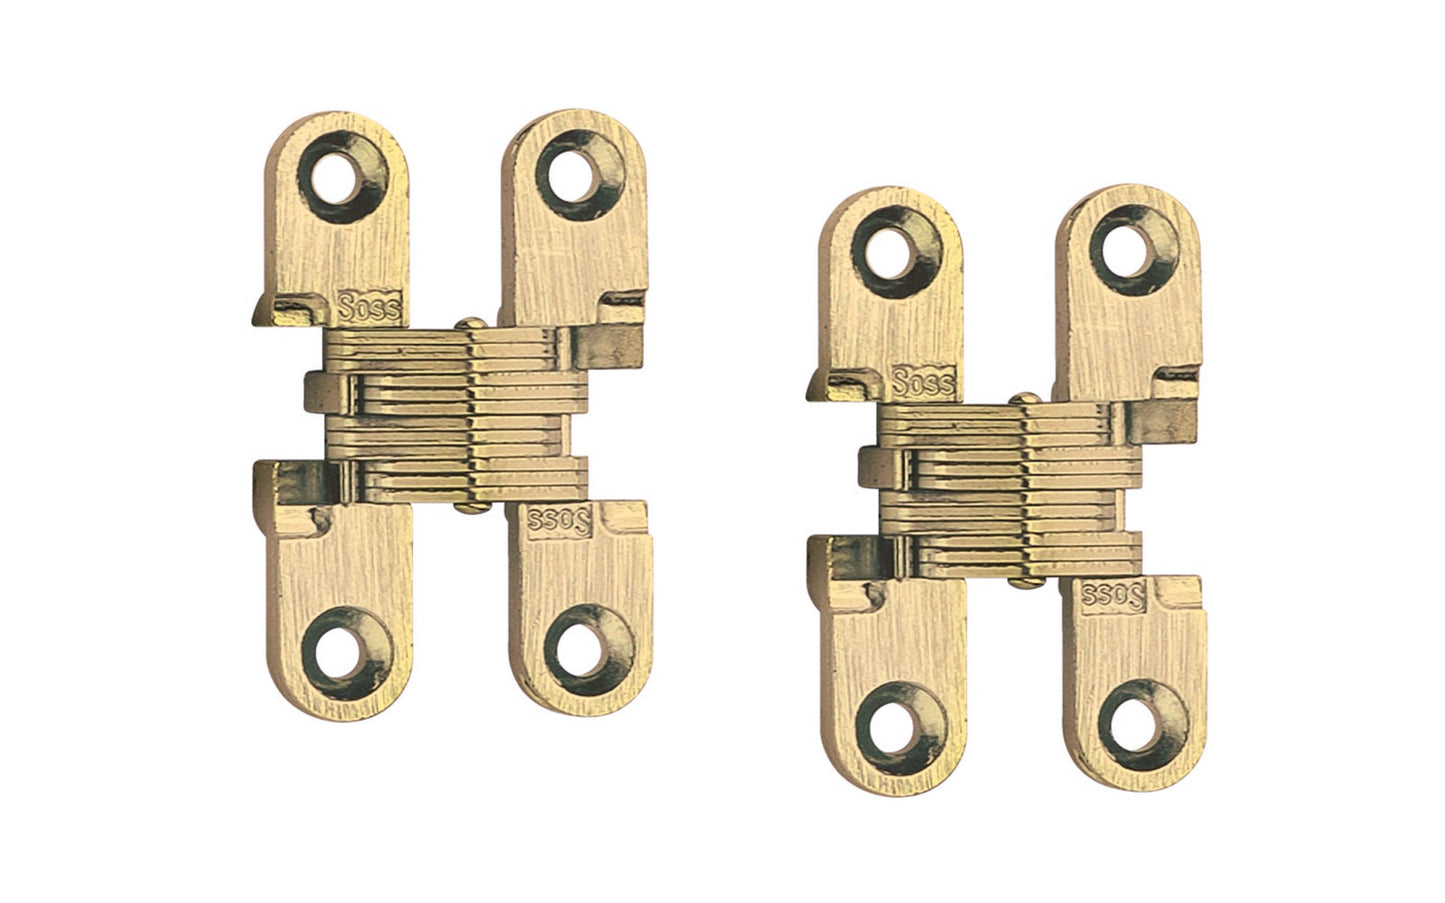 These Soss invisible hinges are manufactured of steel with a satin brass finish. Fully concealed hinge. Use where a full 180 deg. opening and smooth flush finish. Sold as two hinges in pack. 2 Pack.